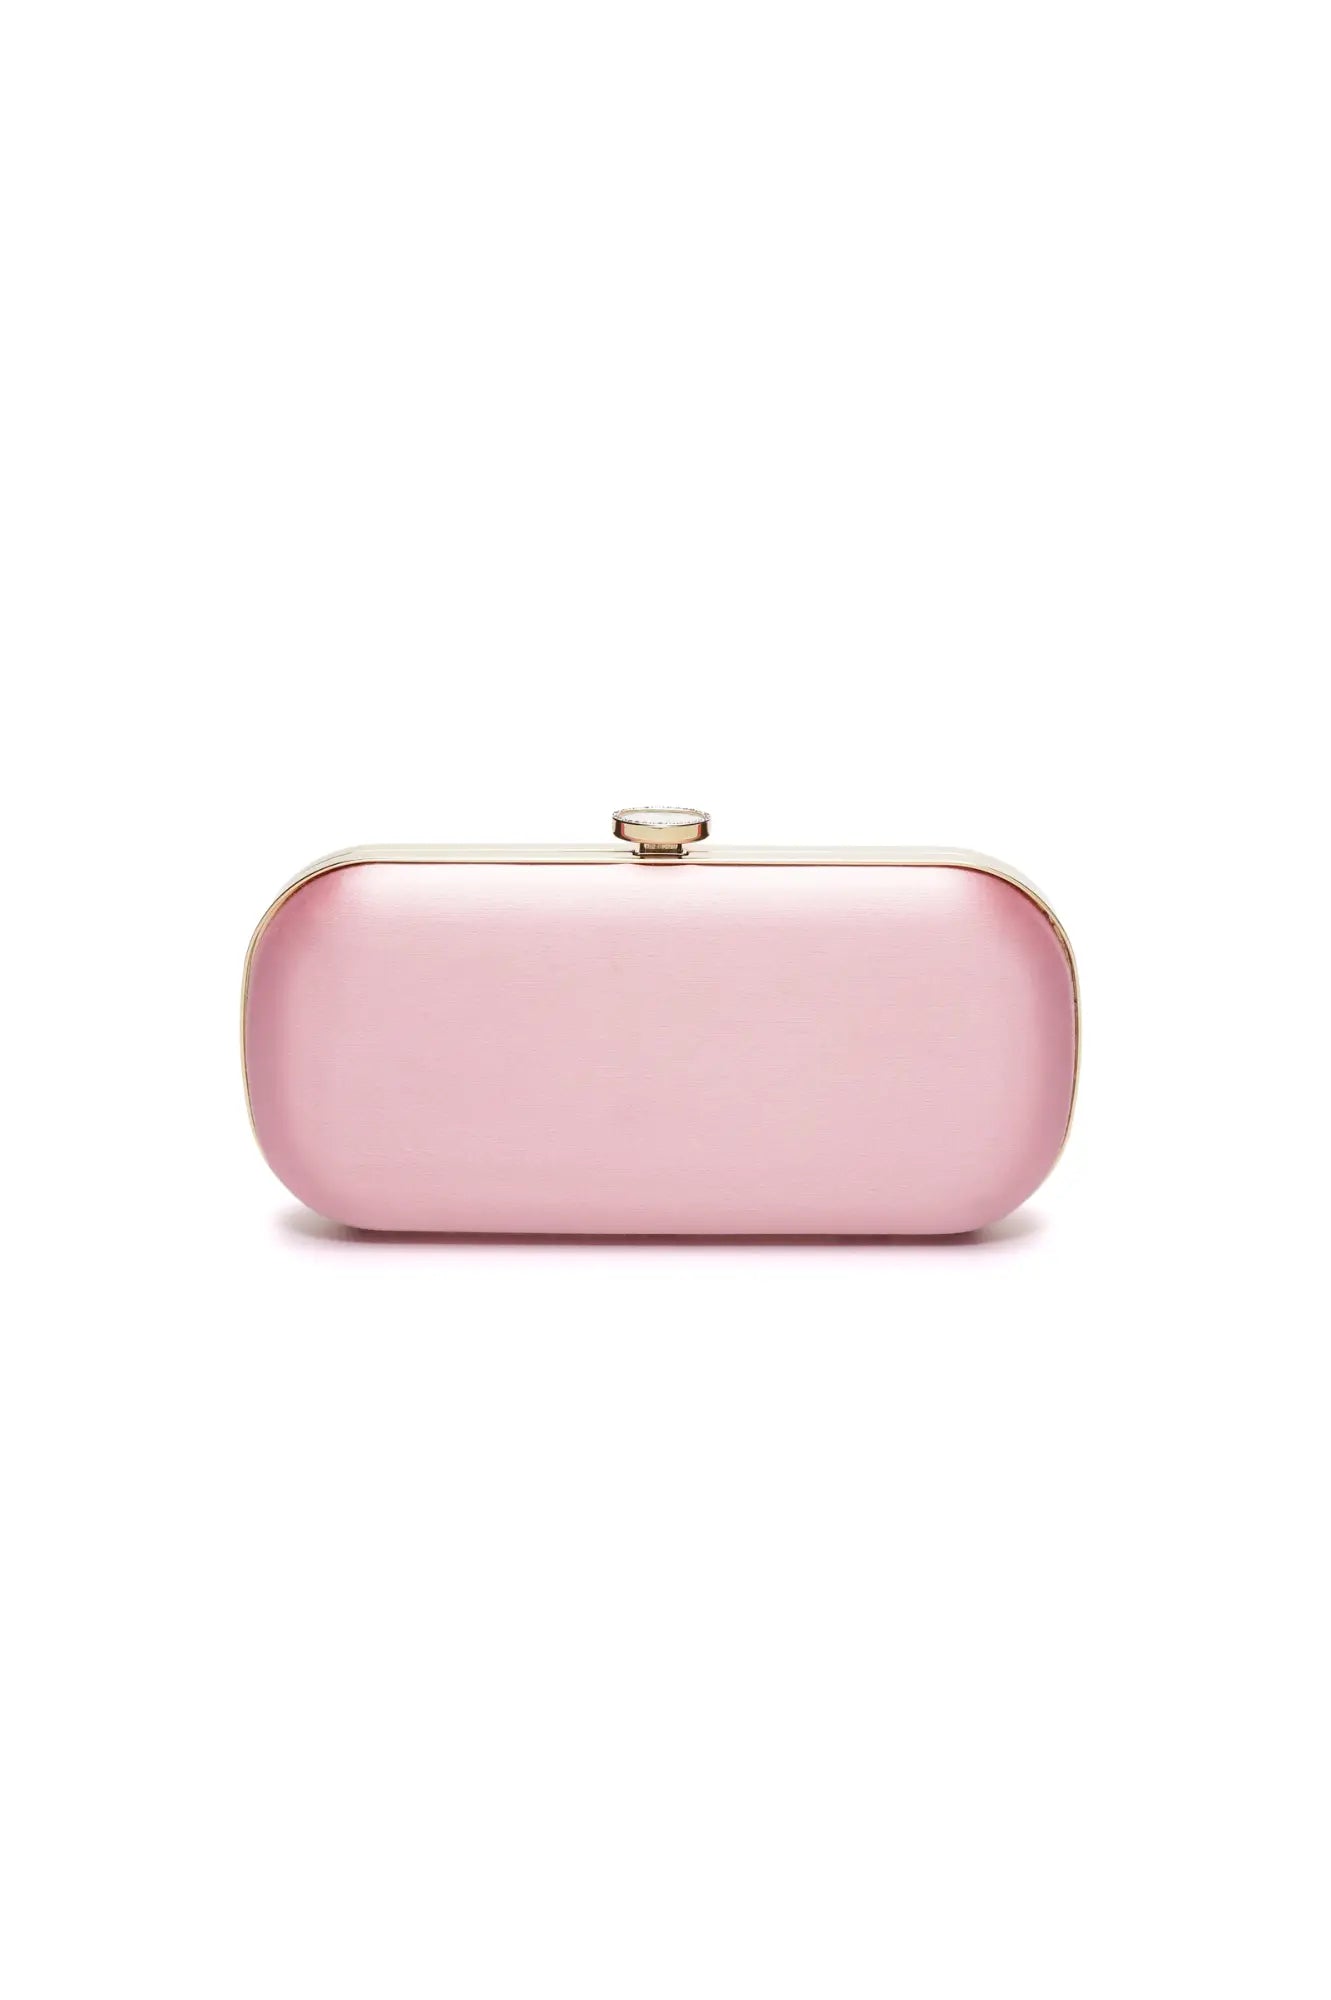 Bella Clutch Pink Petite purse from The Bella Rosa Collection on a white background.